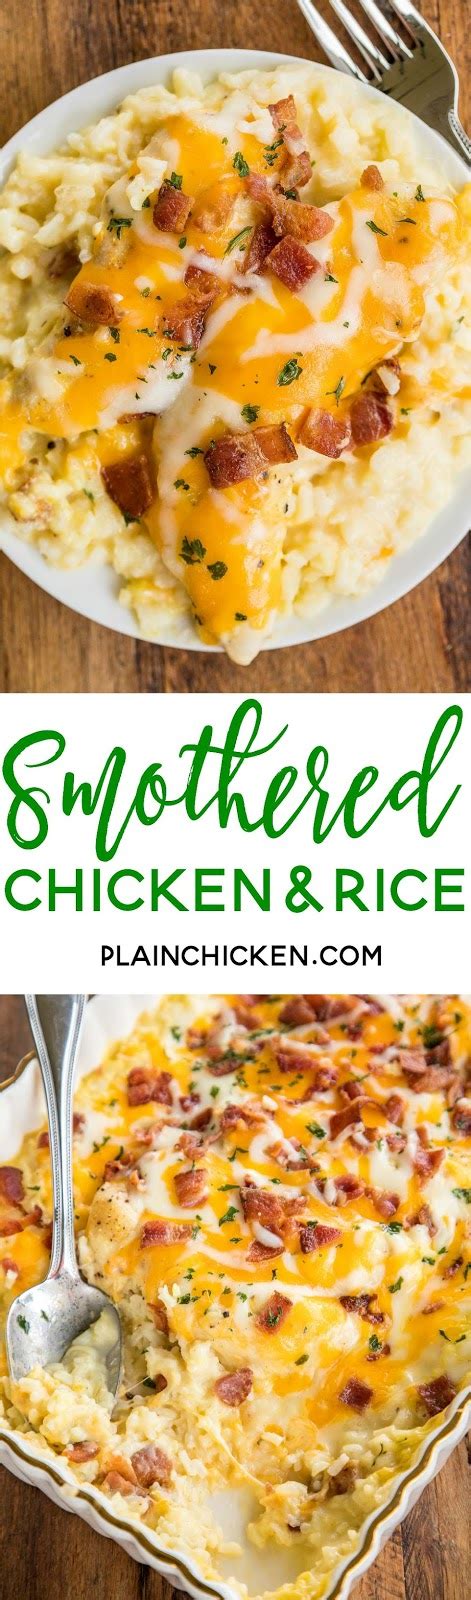 For best results, use popeye's chicken nuggets or popcorn shrimp. Smothered Chicken and Rice | Plain Chicken®